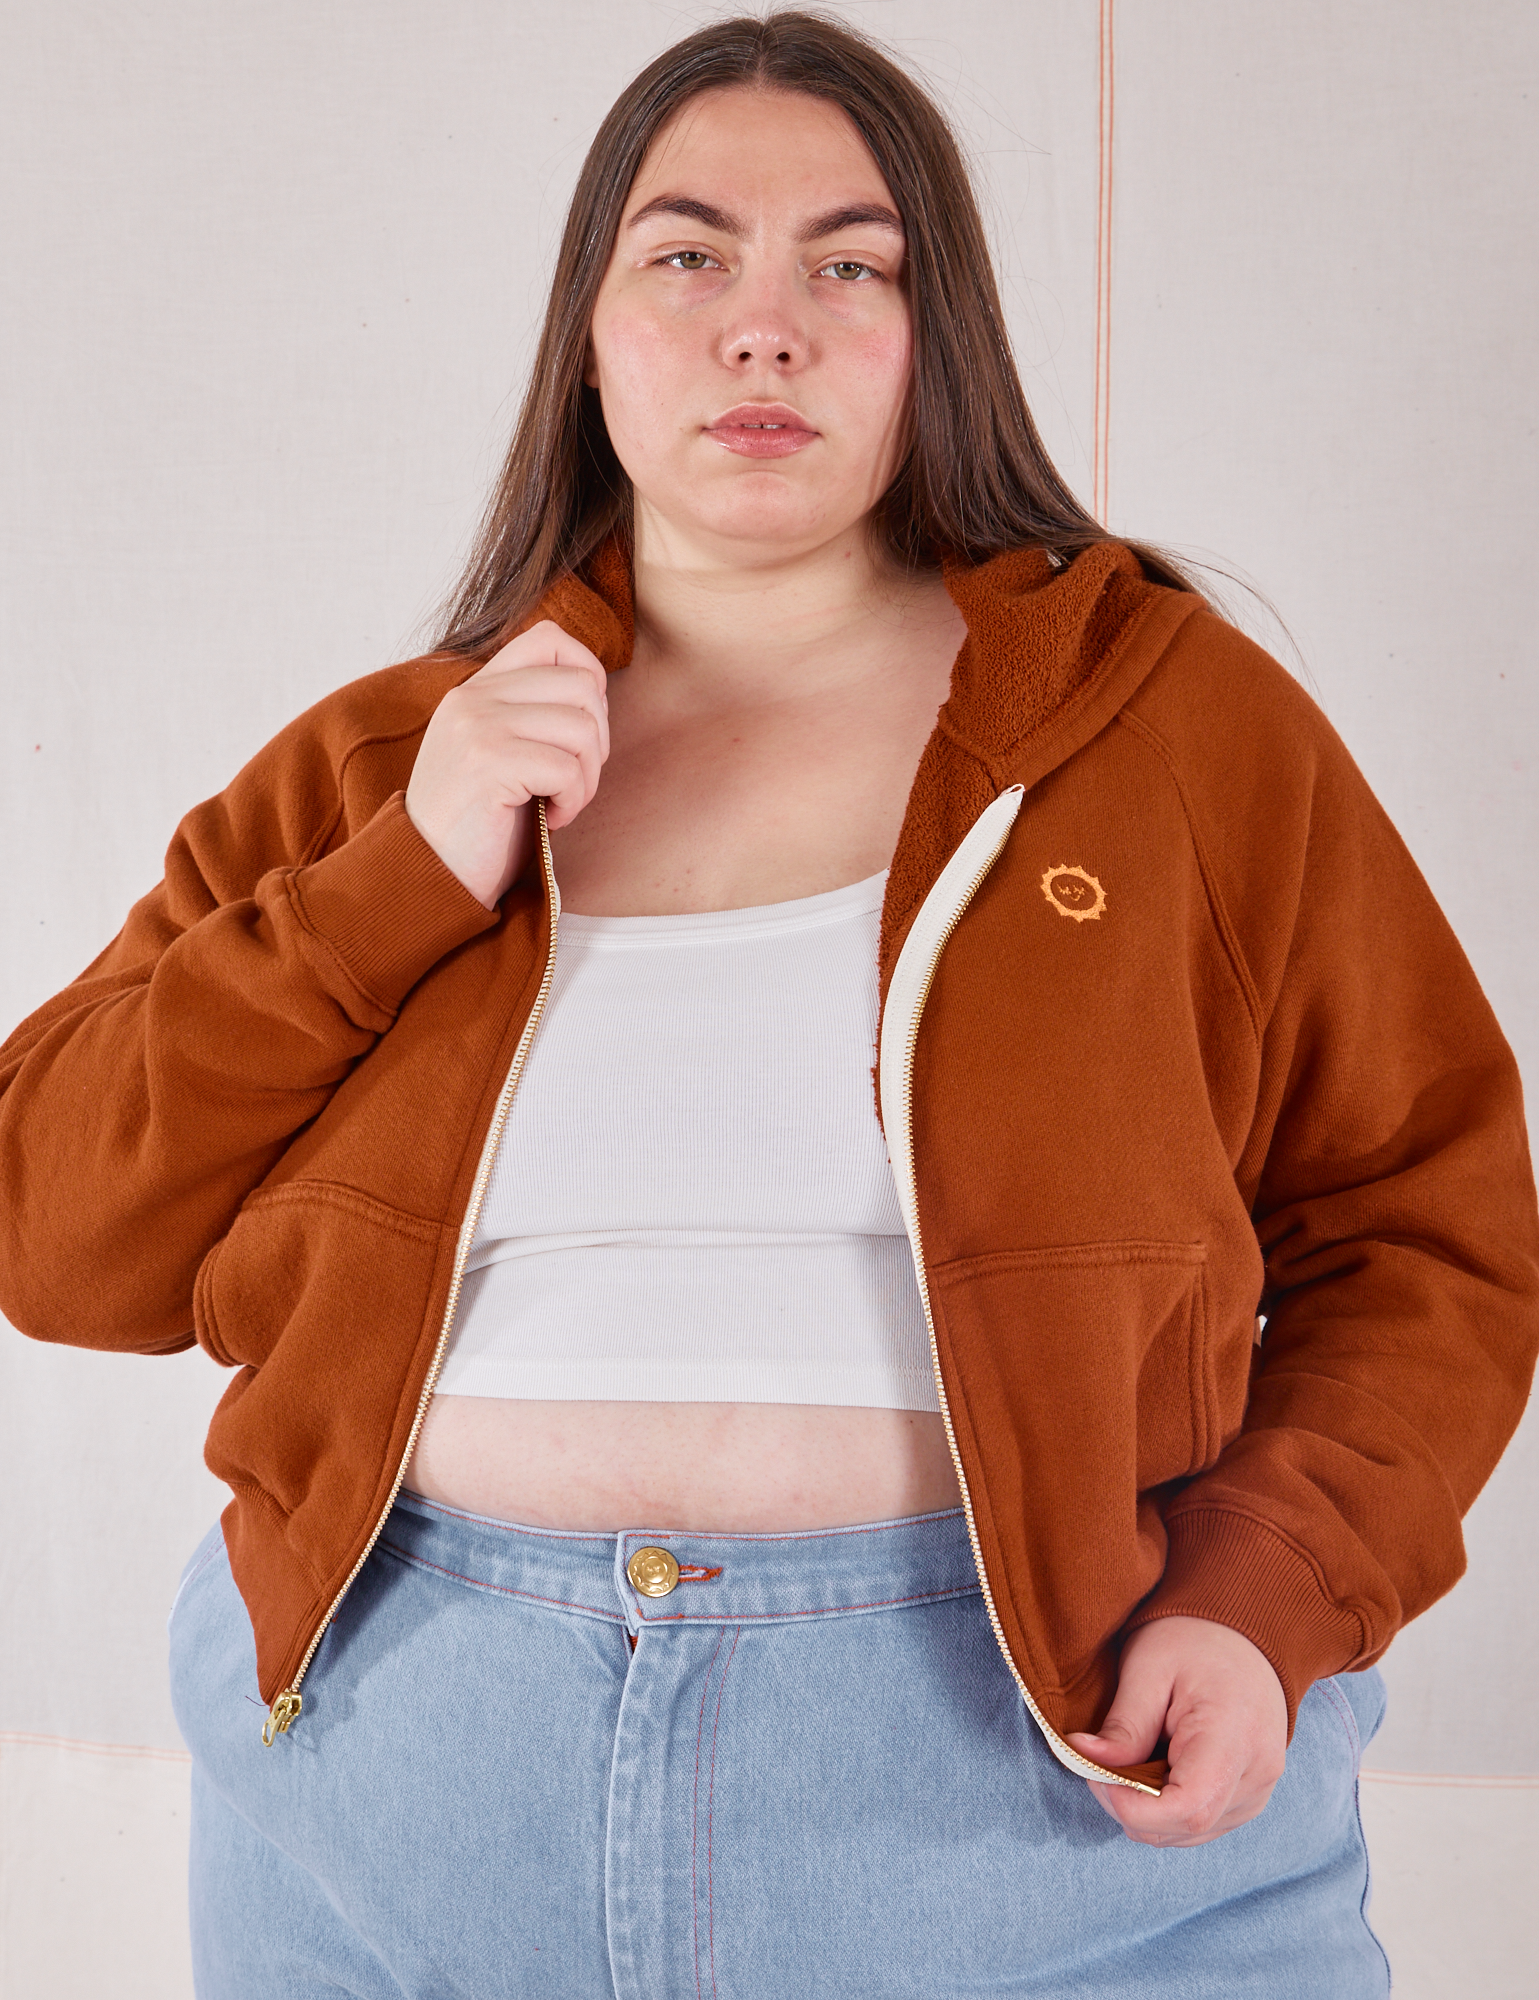 Marielena is wearing Cropped Zip Hoodie in Burnt Terracotta and a vintage off-white Cropped Tank underneath